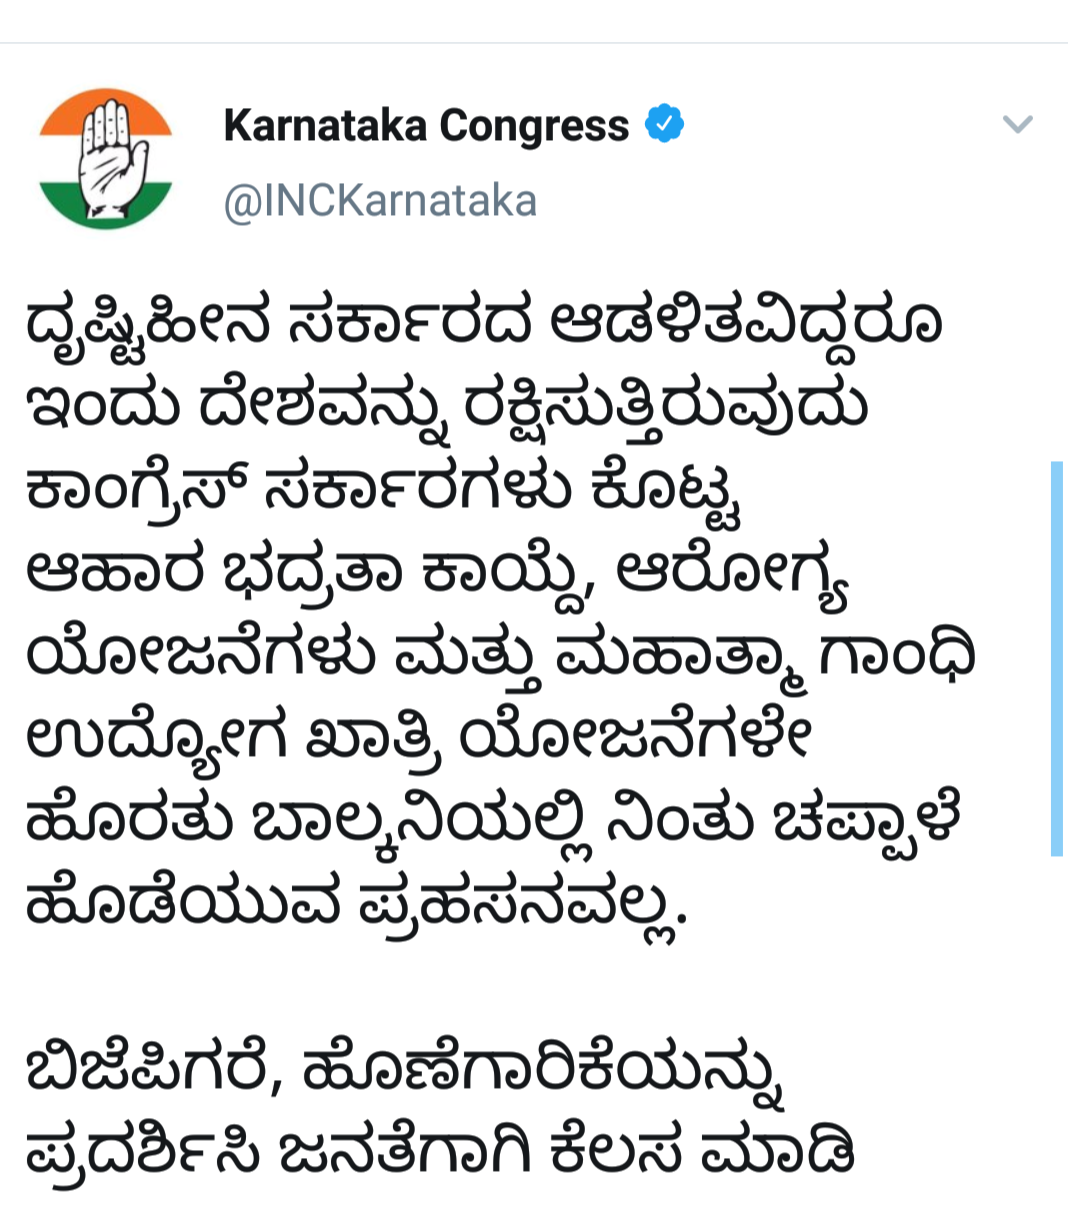 State Congress, which teased the central government with a tweet